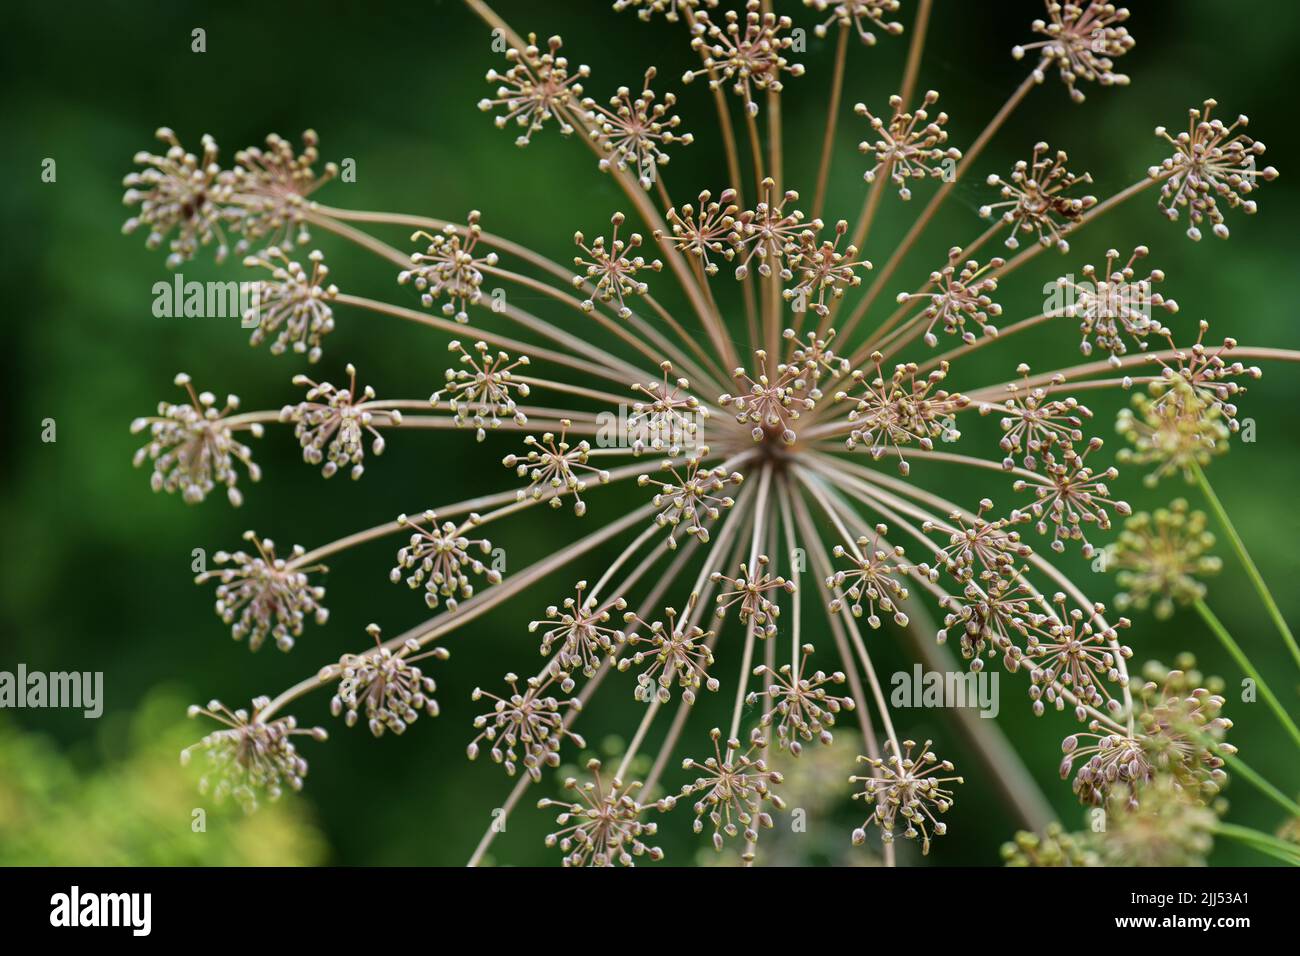 Dill, inflorescence with ripening seeds, healthy plant in the herb garden for seasoning food or as a healing tea in digestive disorders, close up with Stock Photo